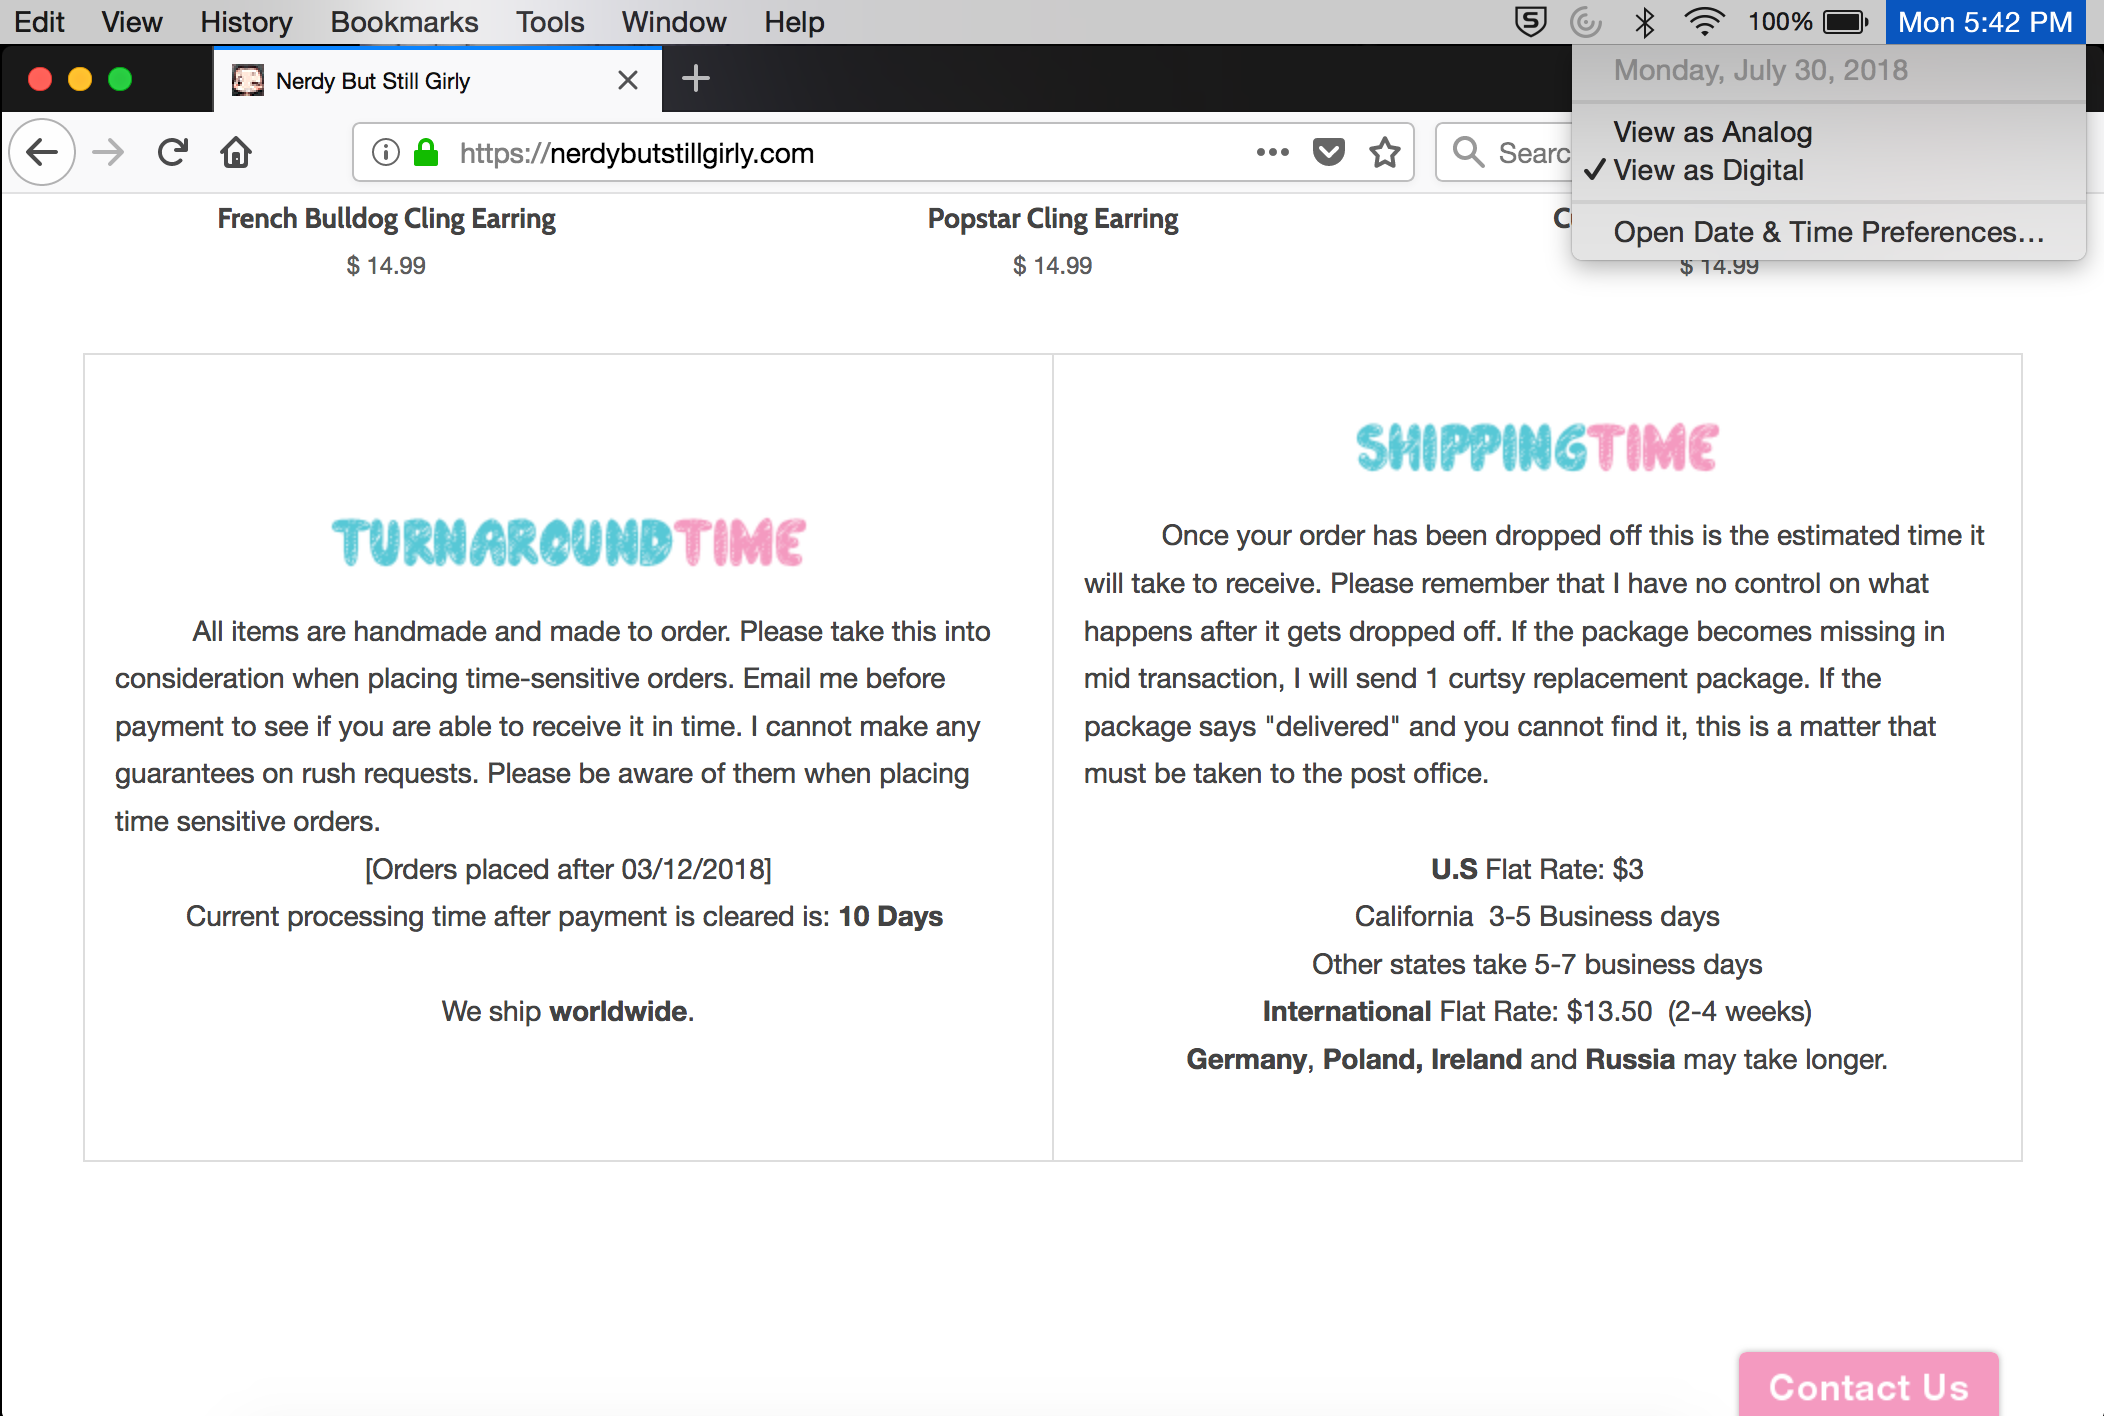 Turn around time/shipping time from website